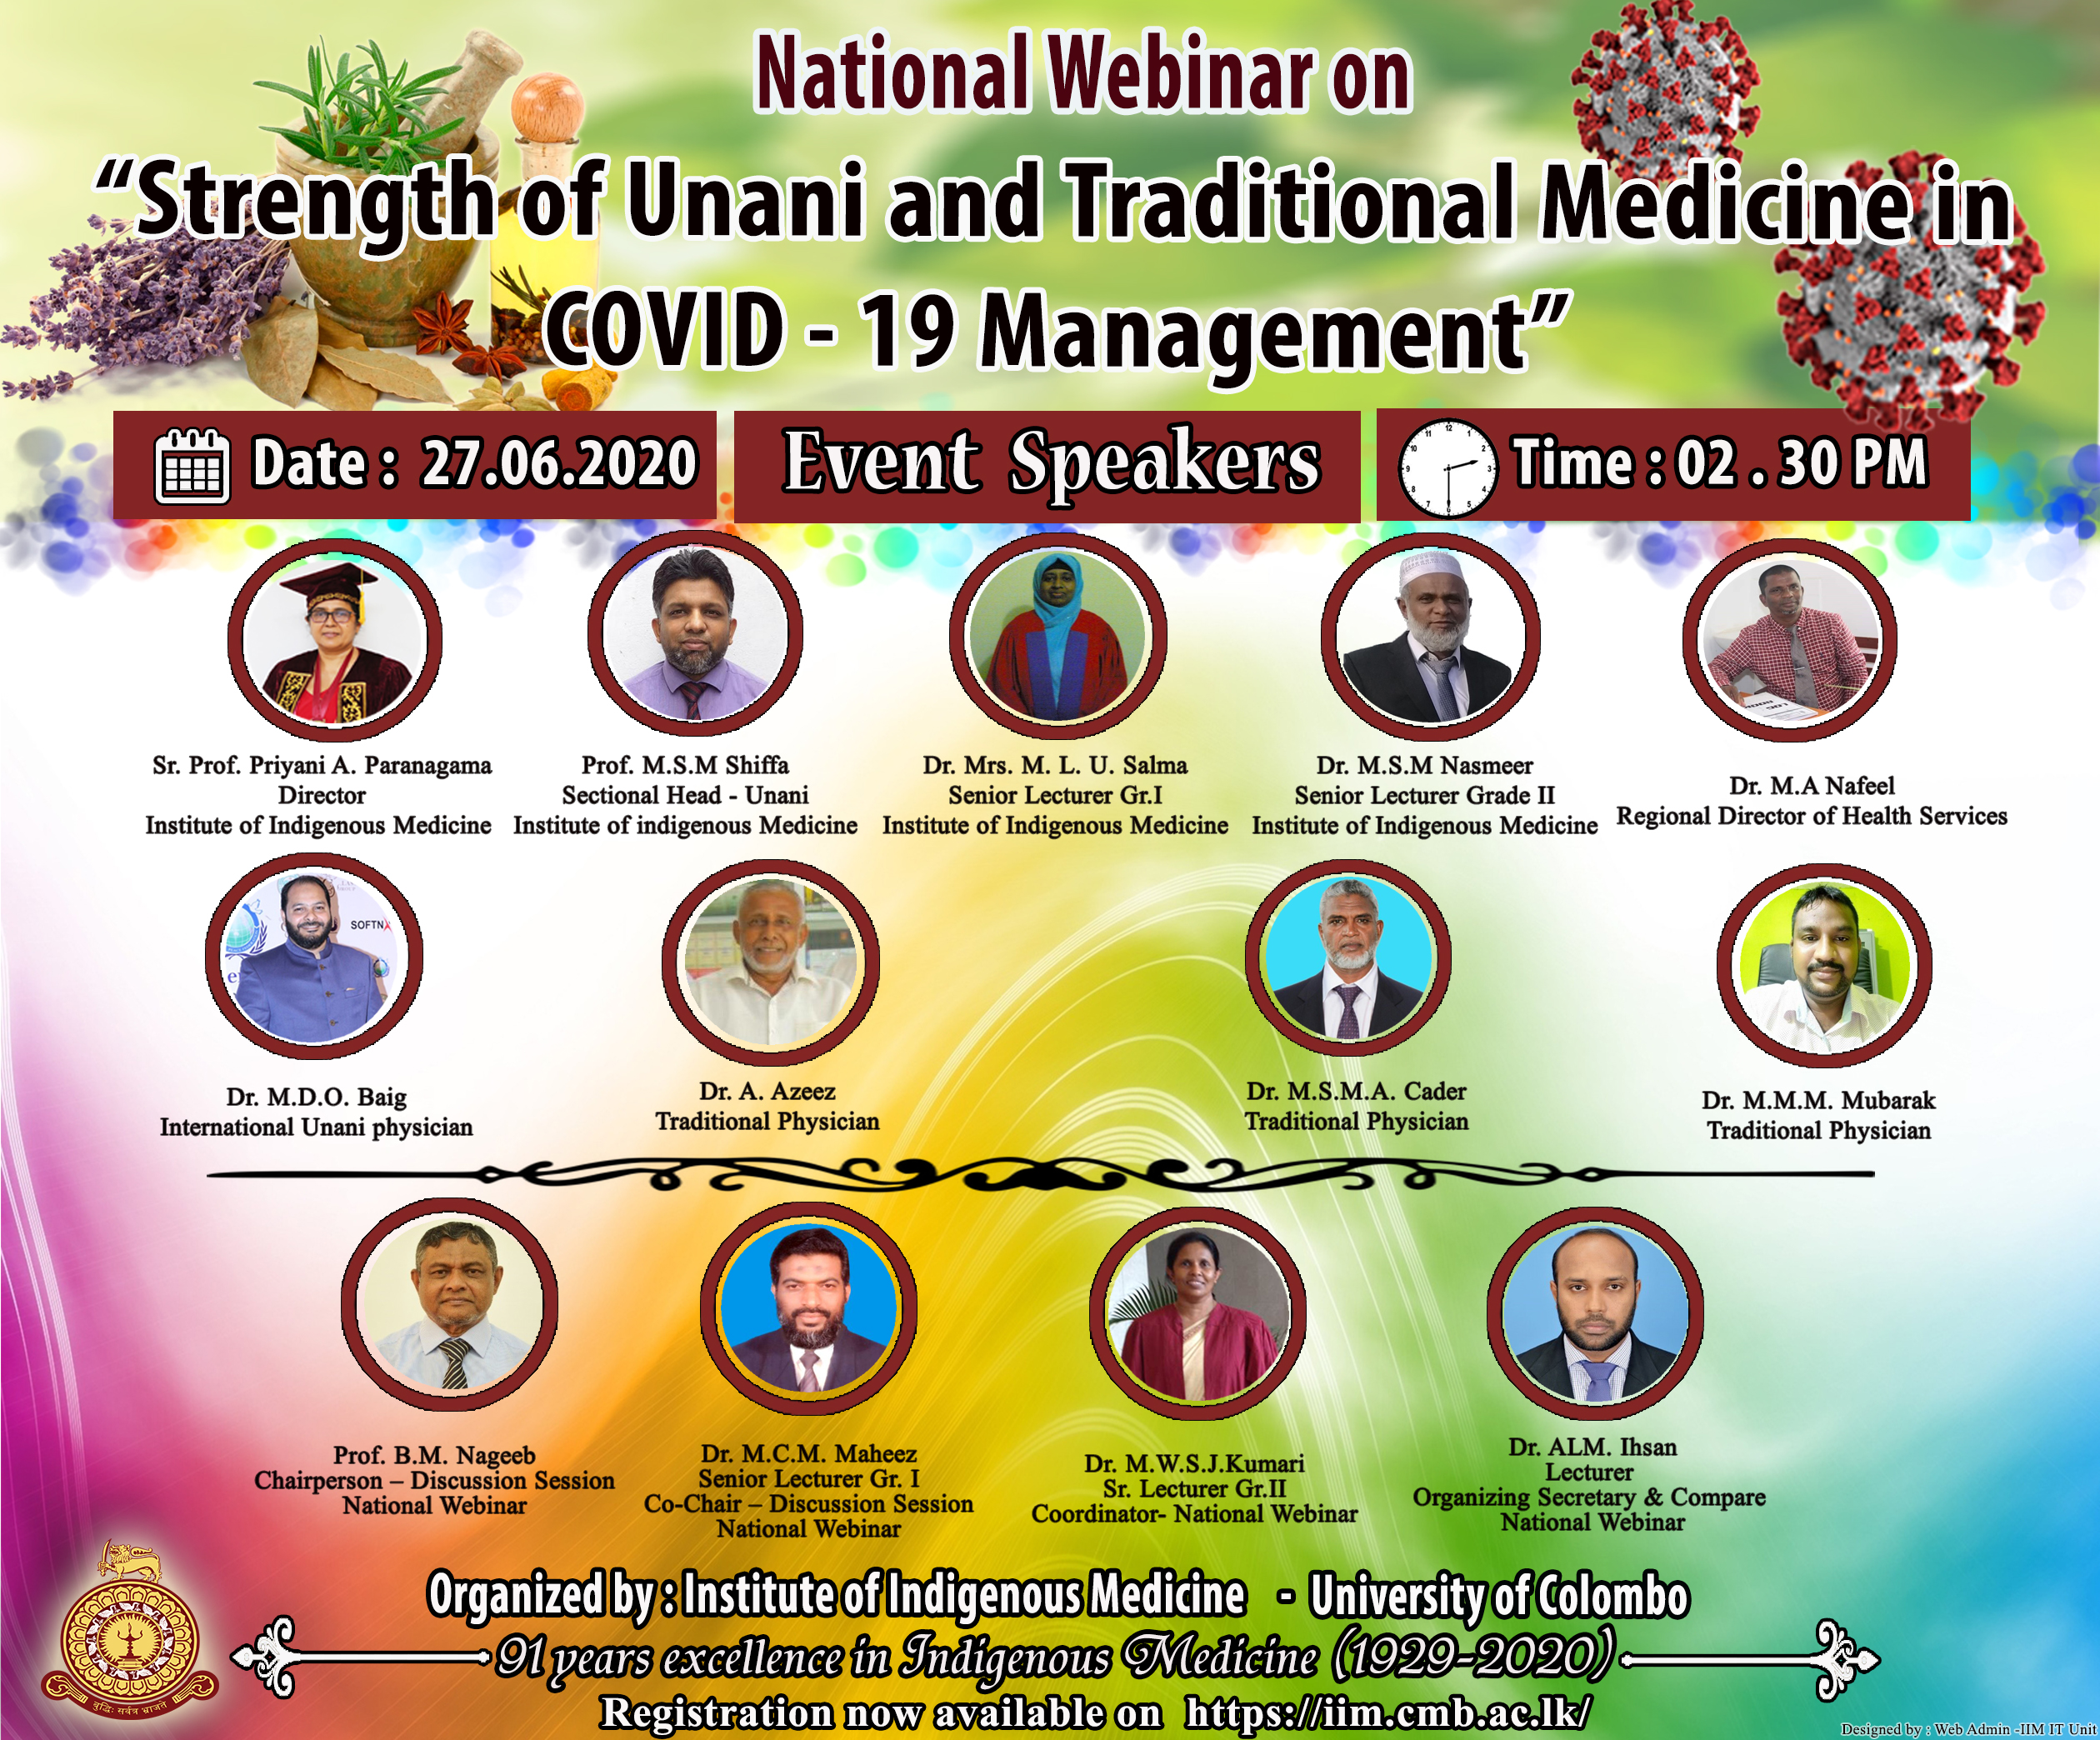 National  Webinar  on  “Strength of  Unani  and  Traditional Medicine  in  COVID -19  Management”